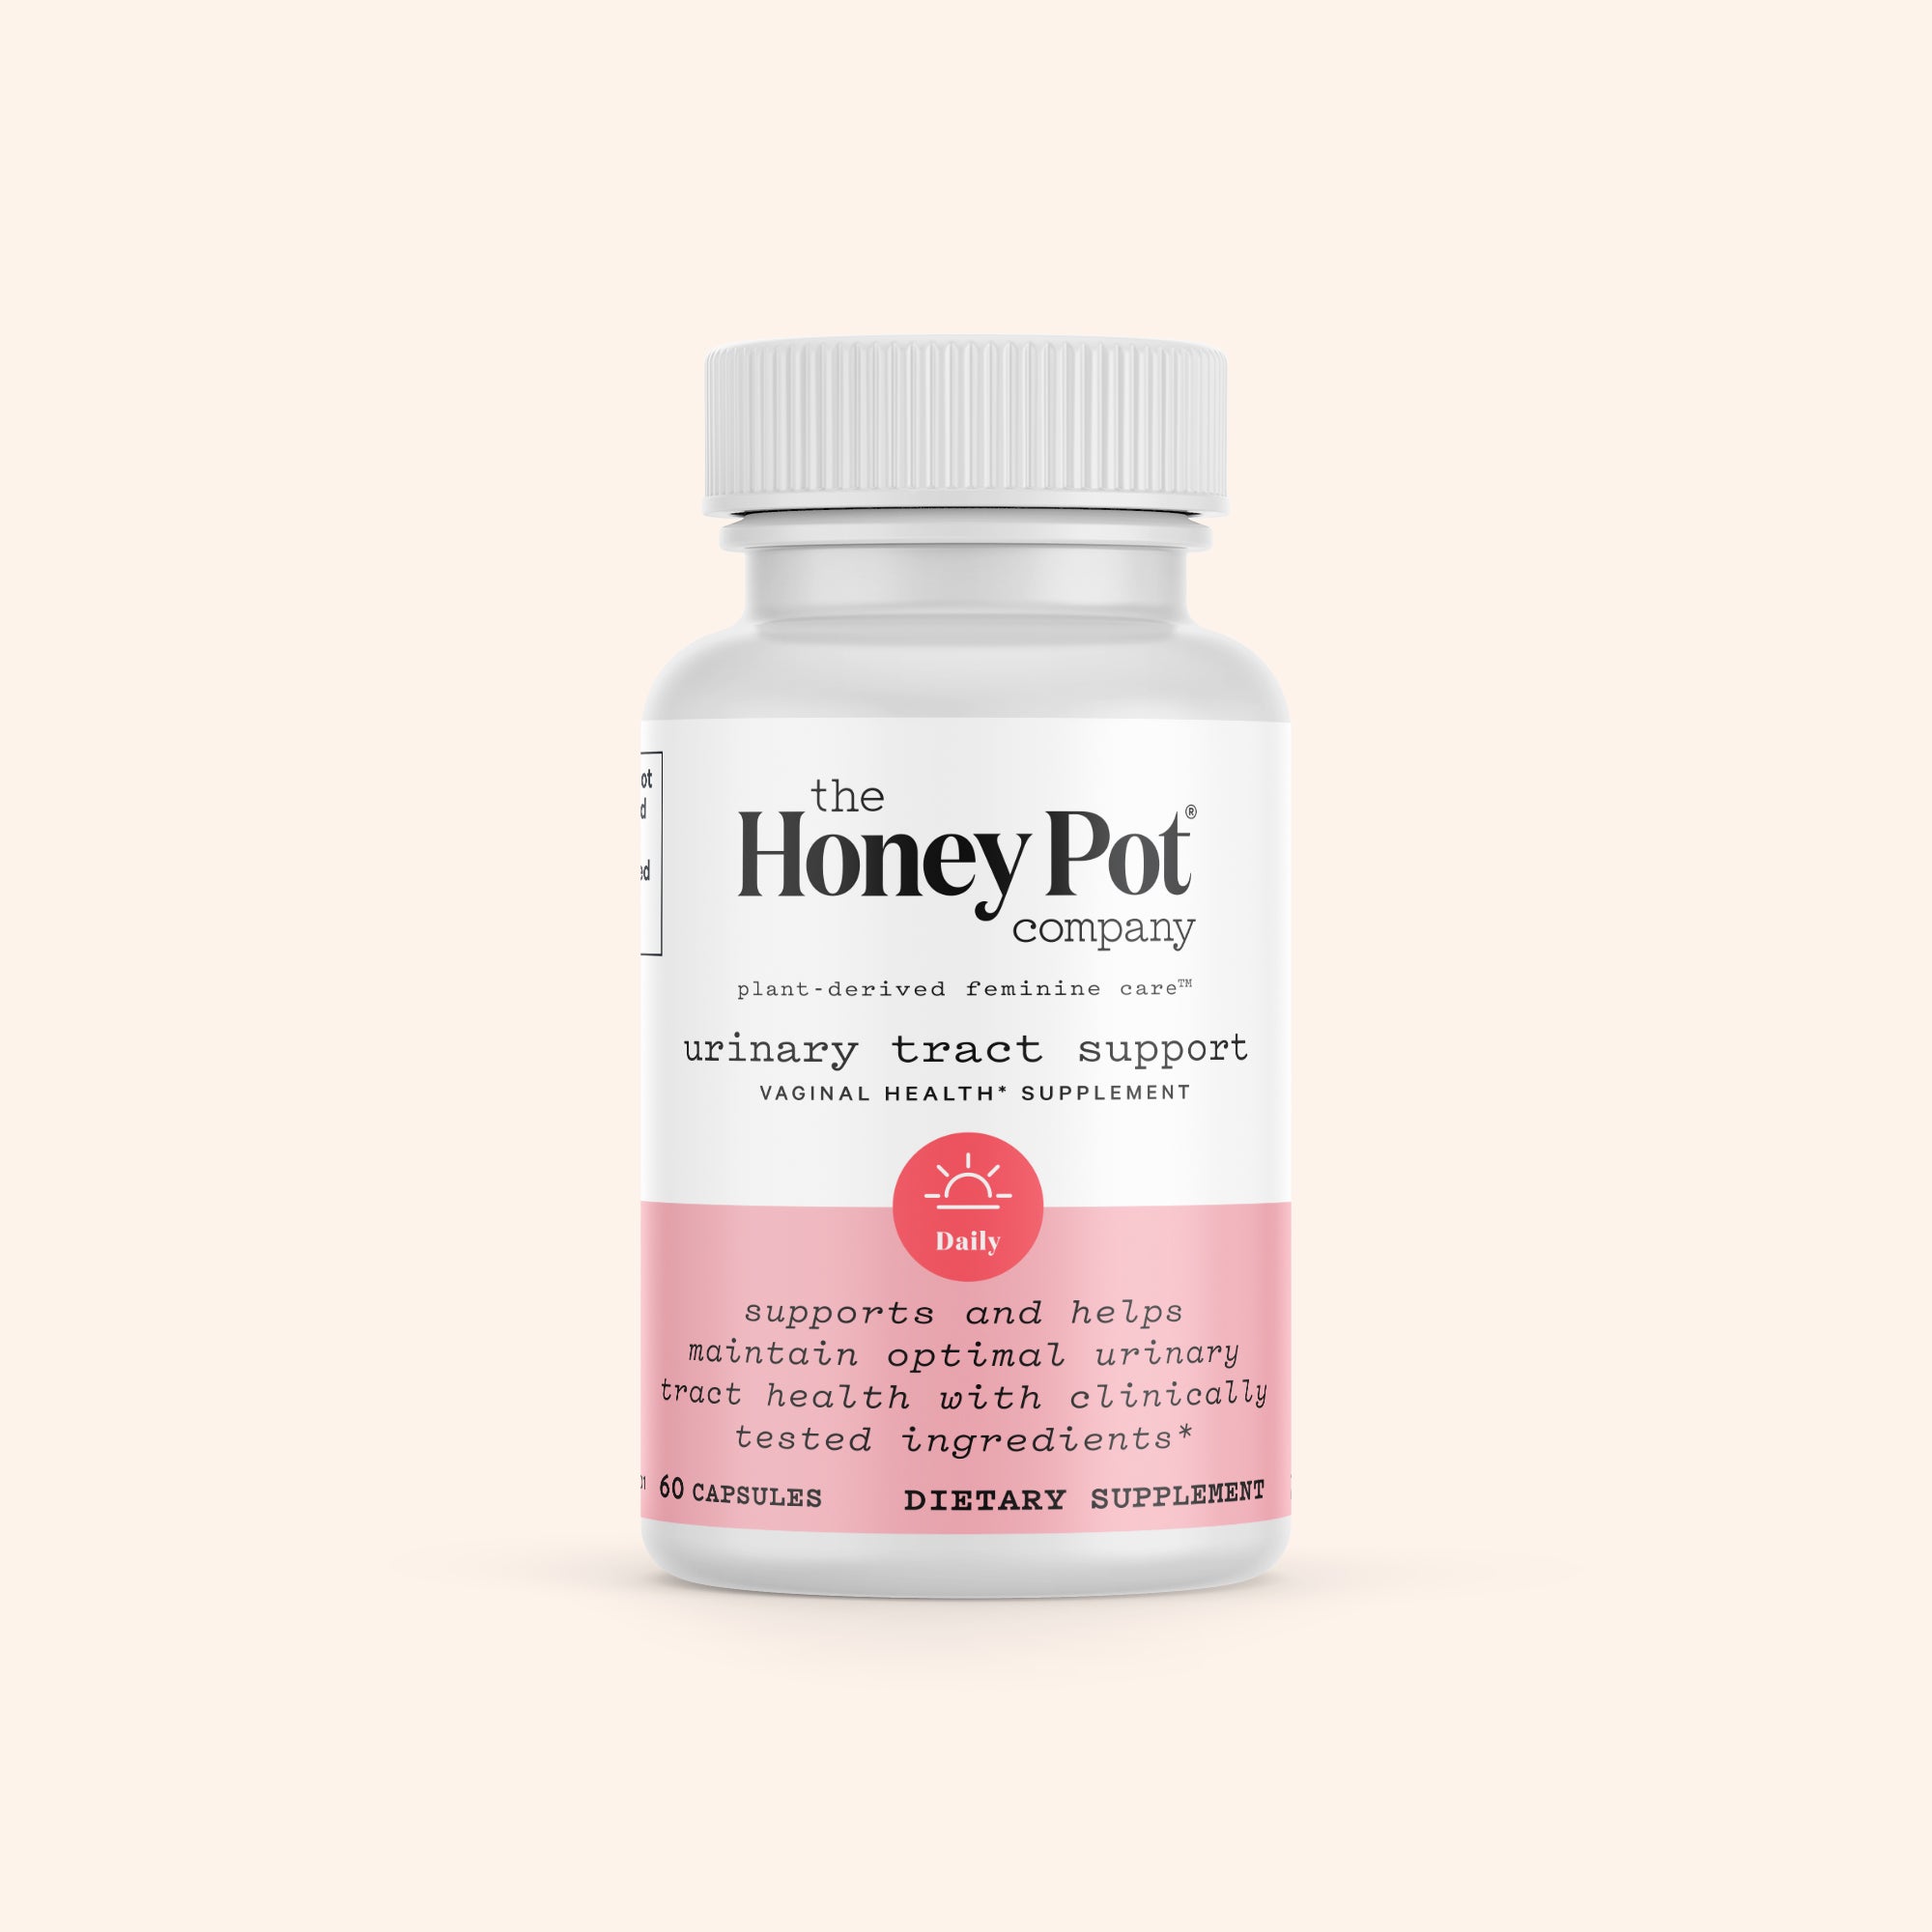 Urinary Tract Support Vaginal Health Supplement